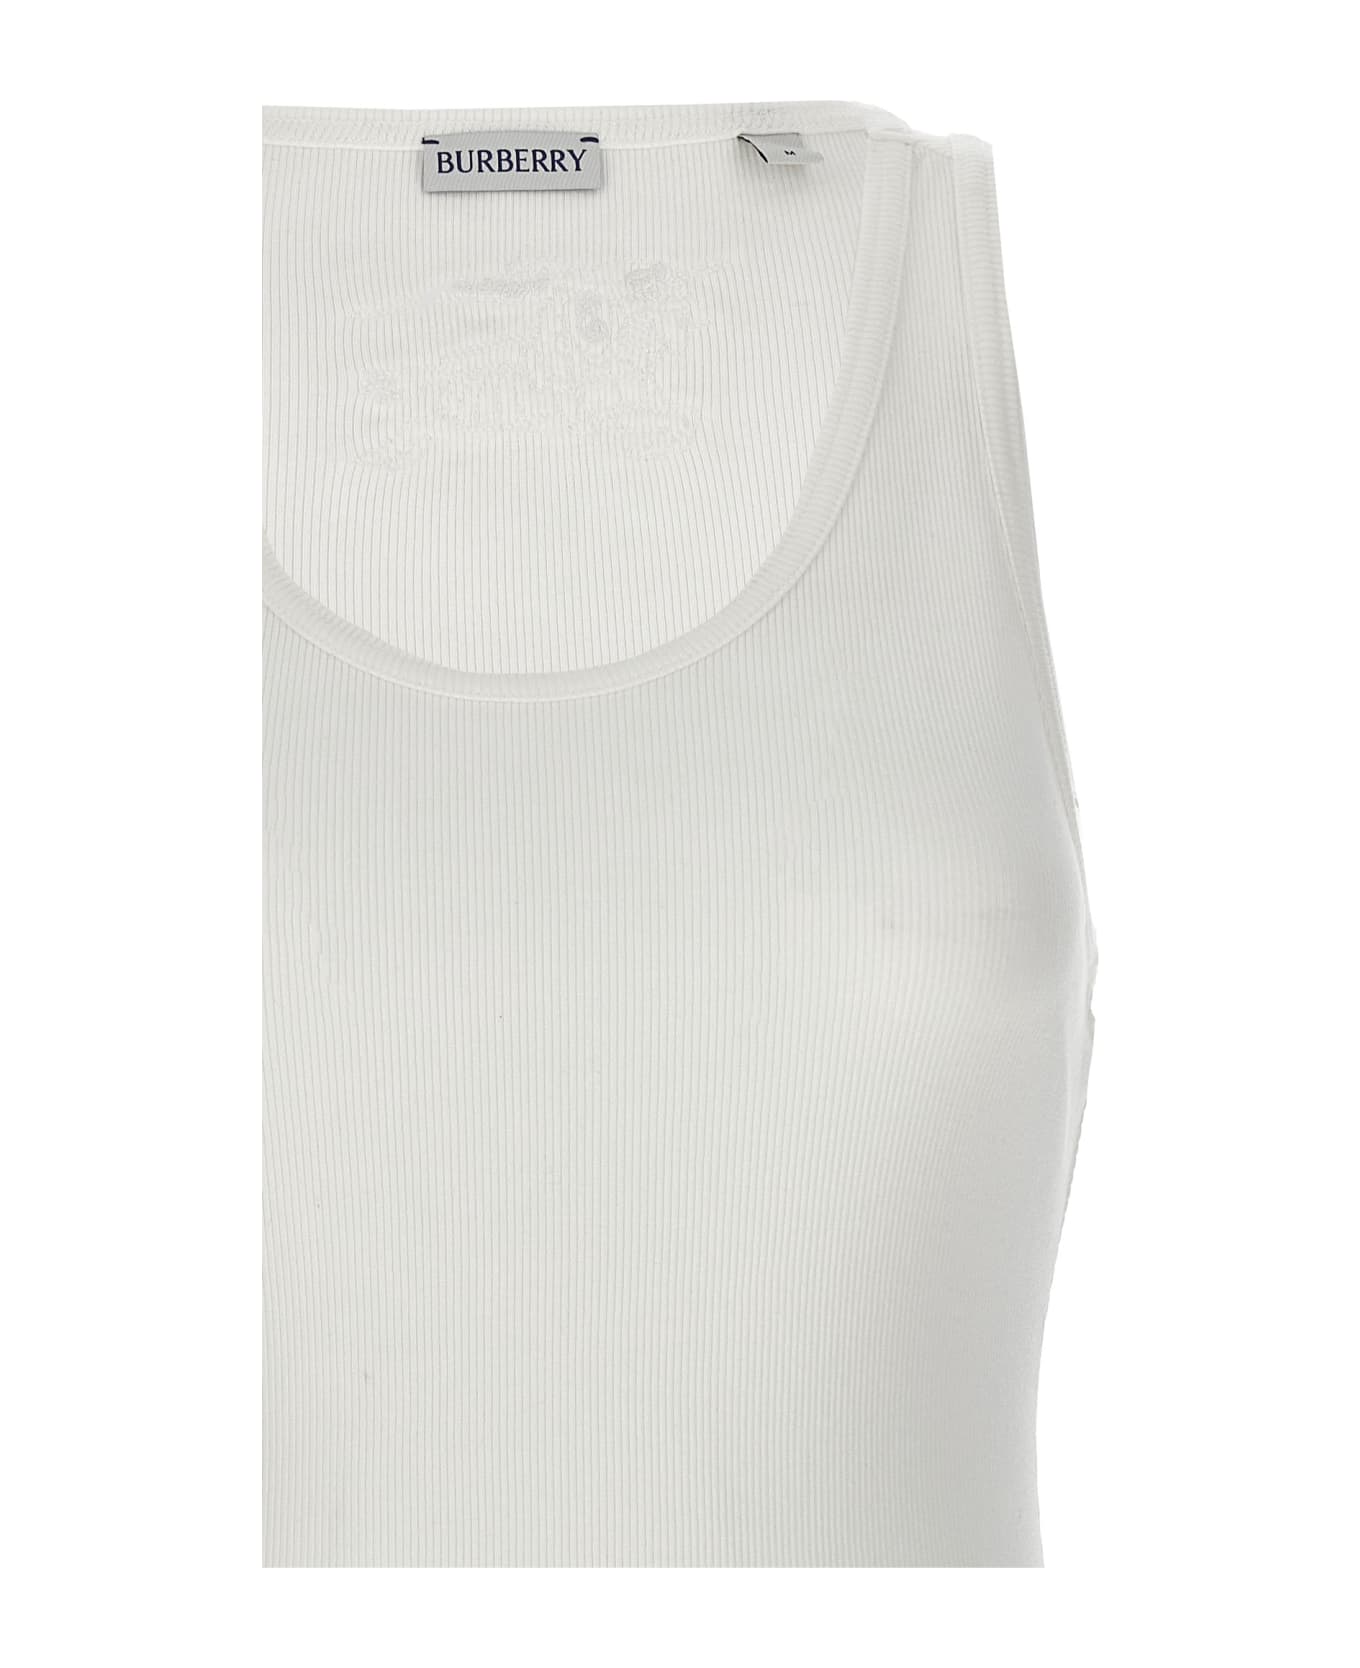 Burberry technical Logo Embroidery Tank Top - White